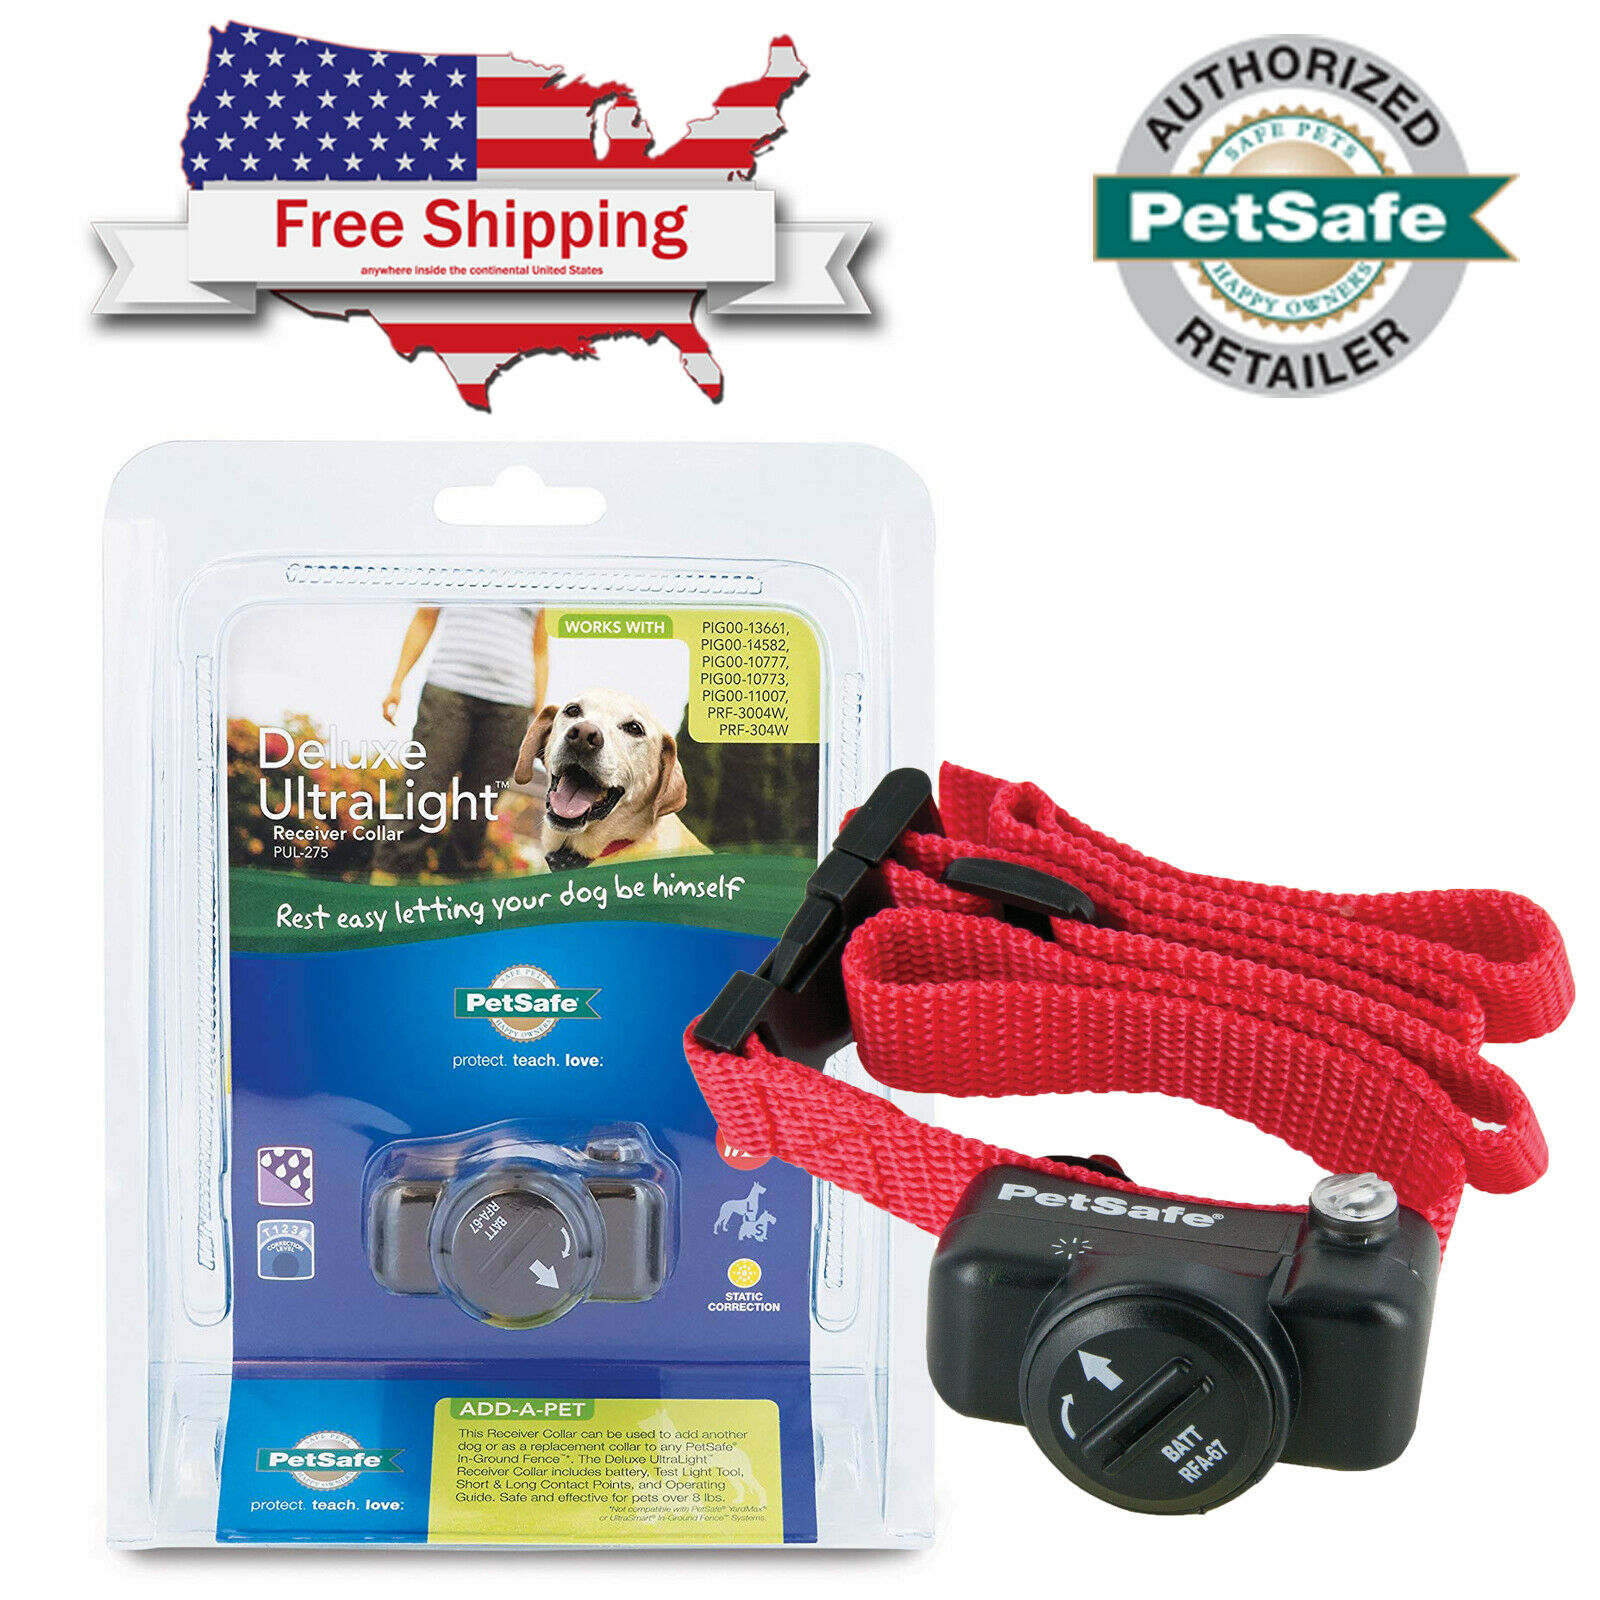 Petsafe In-ground Deluxe Ultralight Dog Fence Collar Receiver Bundle Pul-275